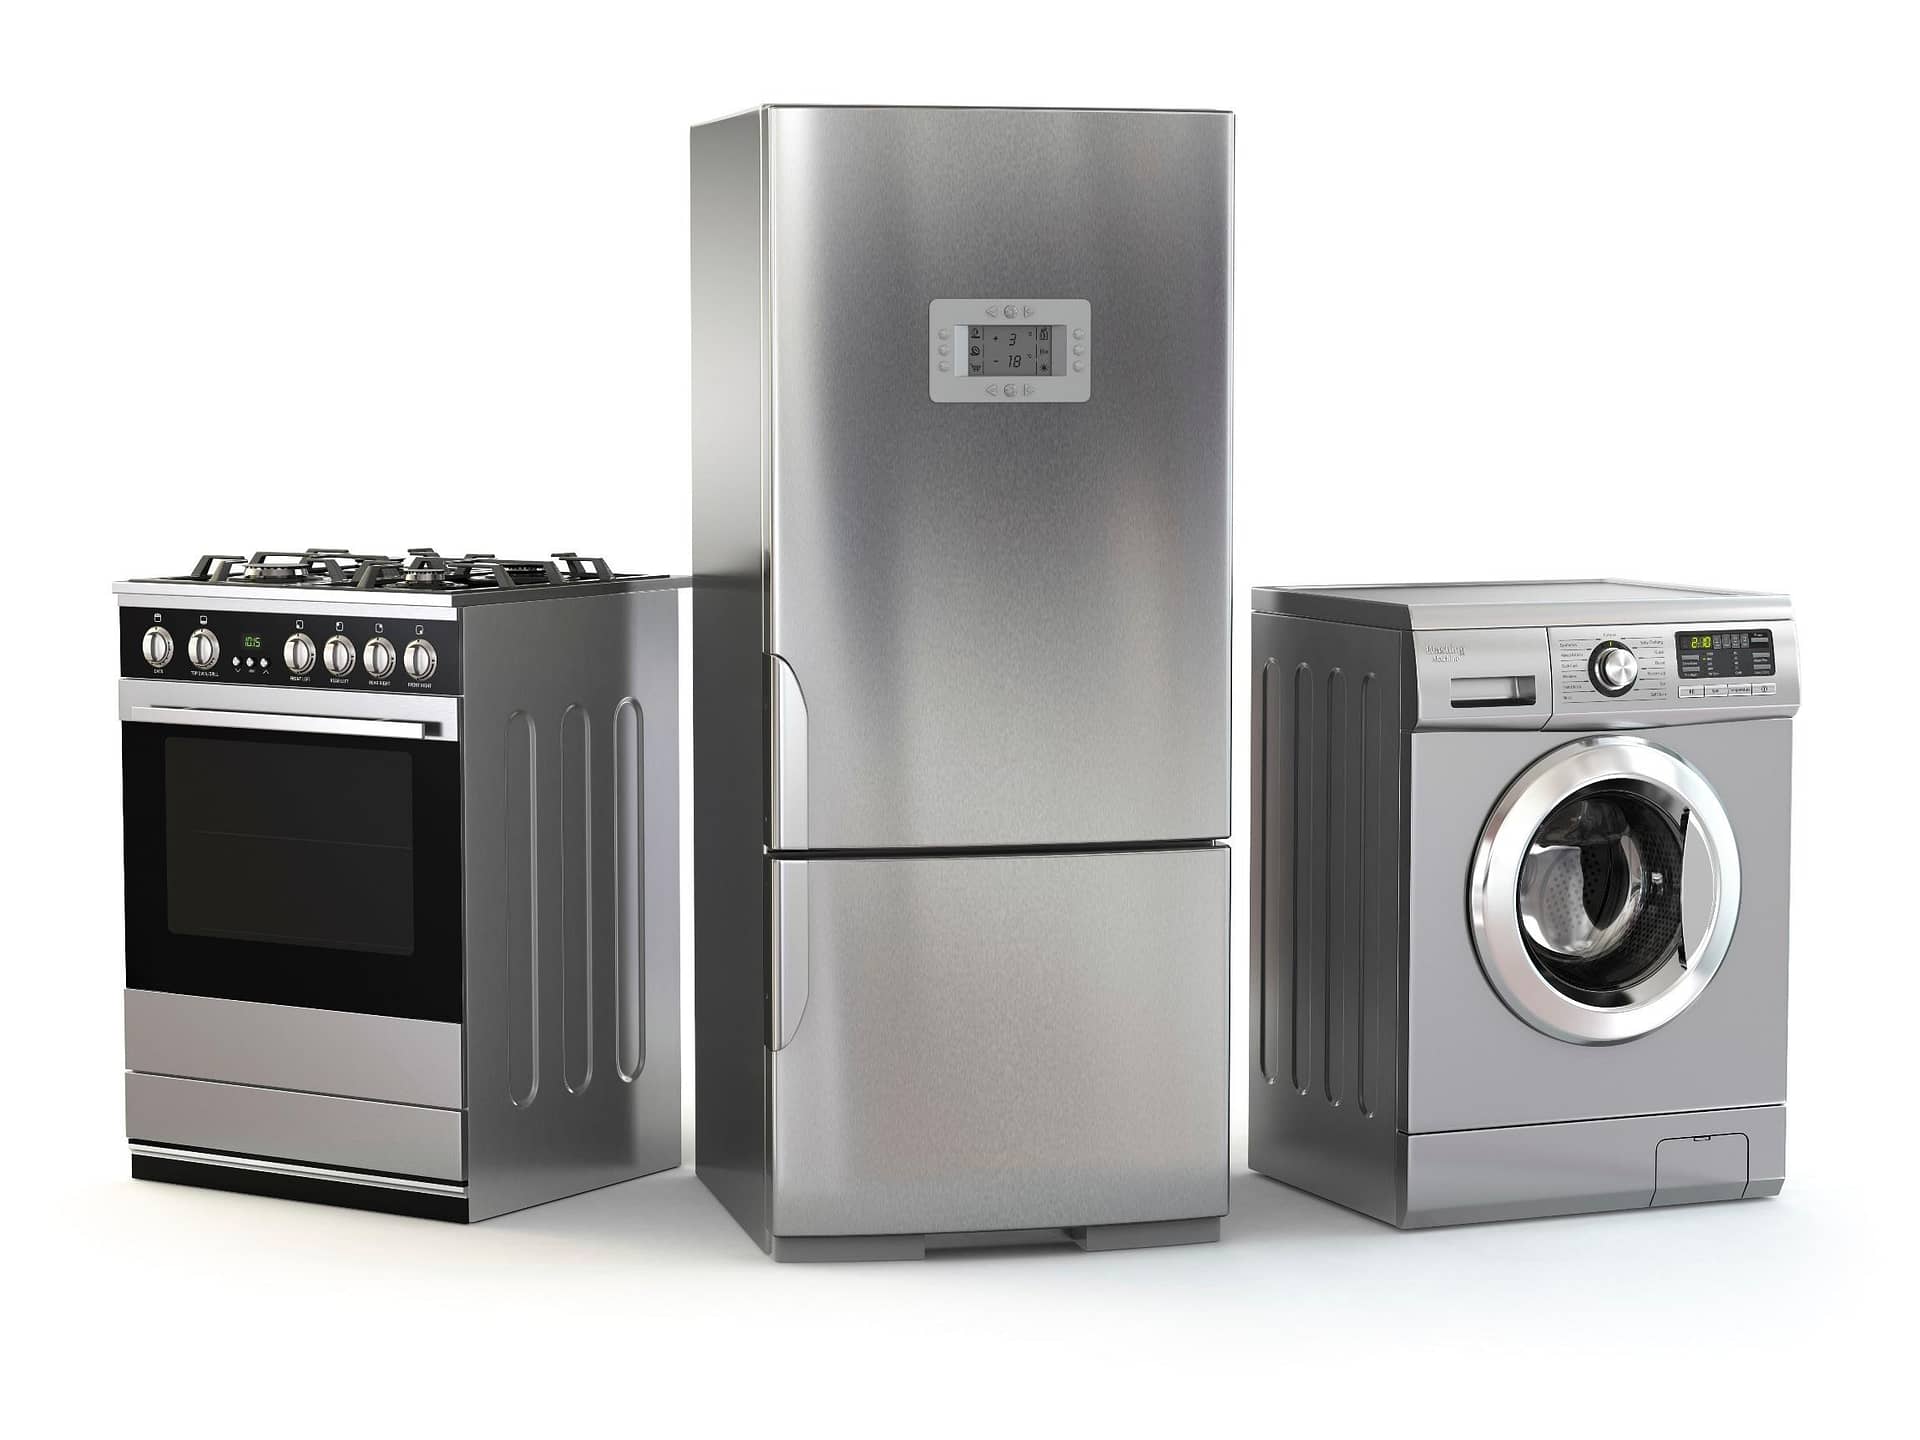 Home appliances in our life